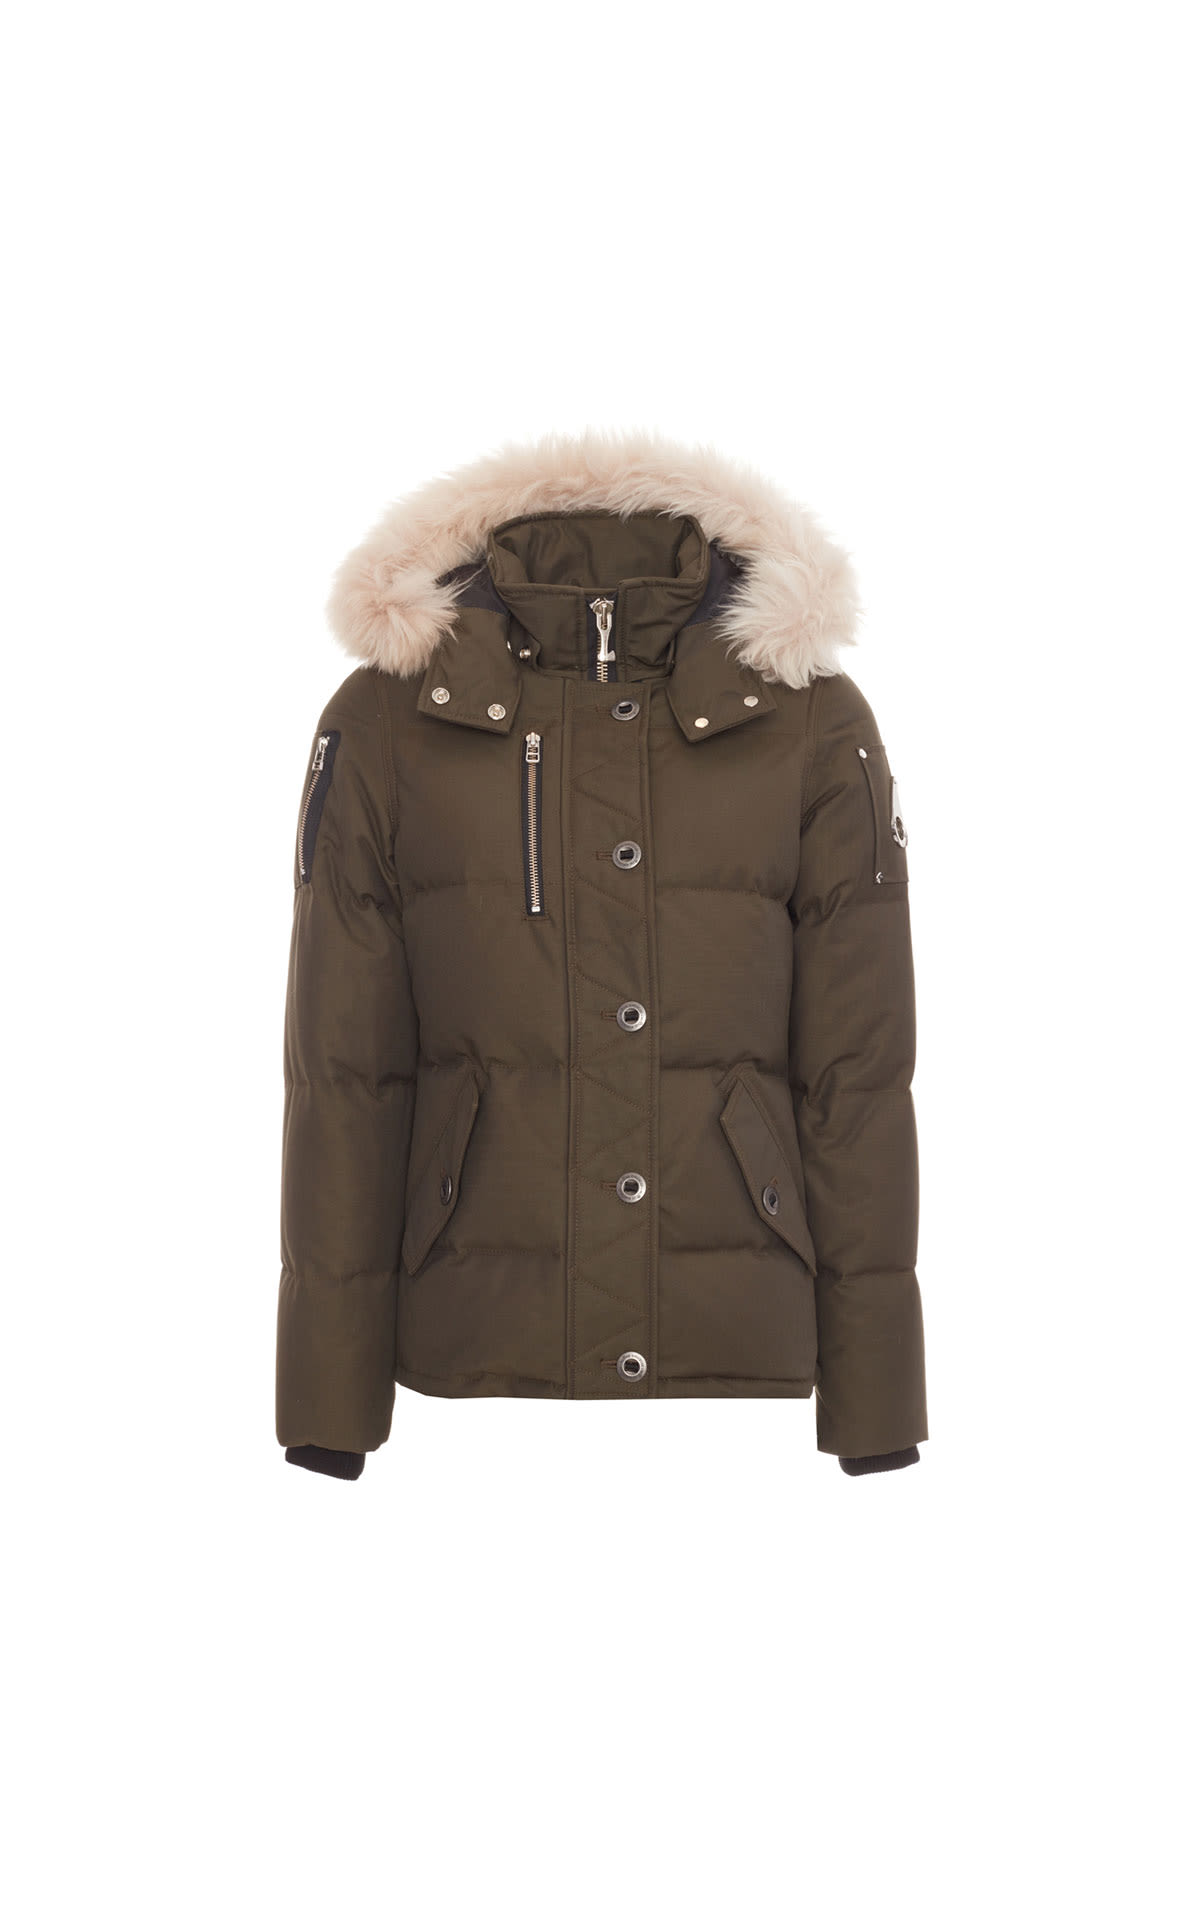 Moose Knuckles Puffer from Bicester Village